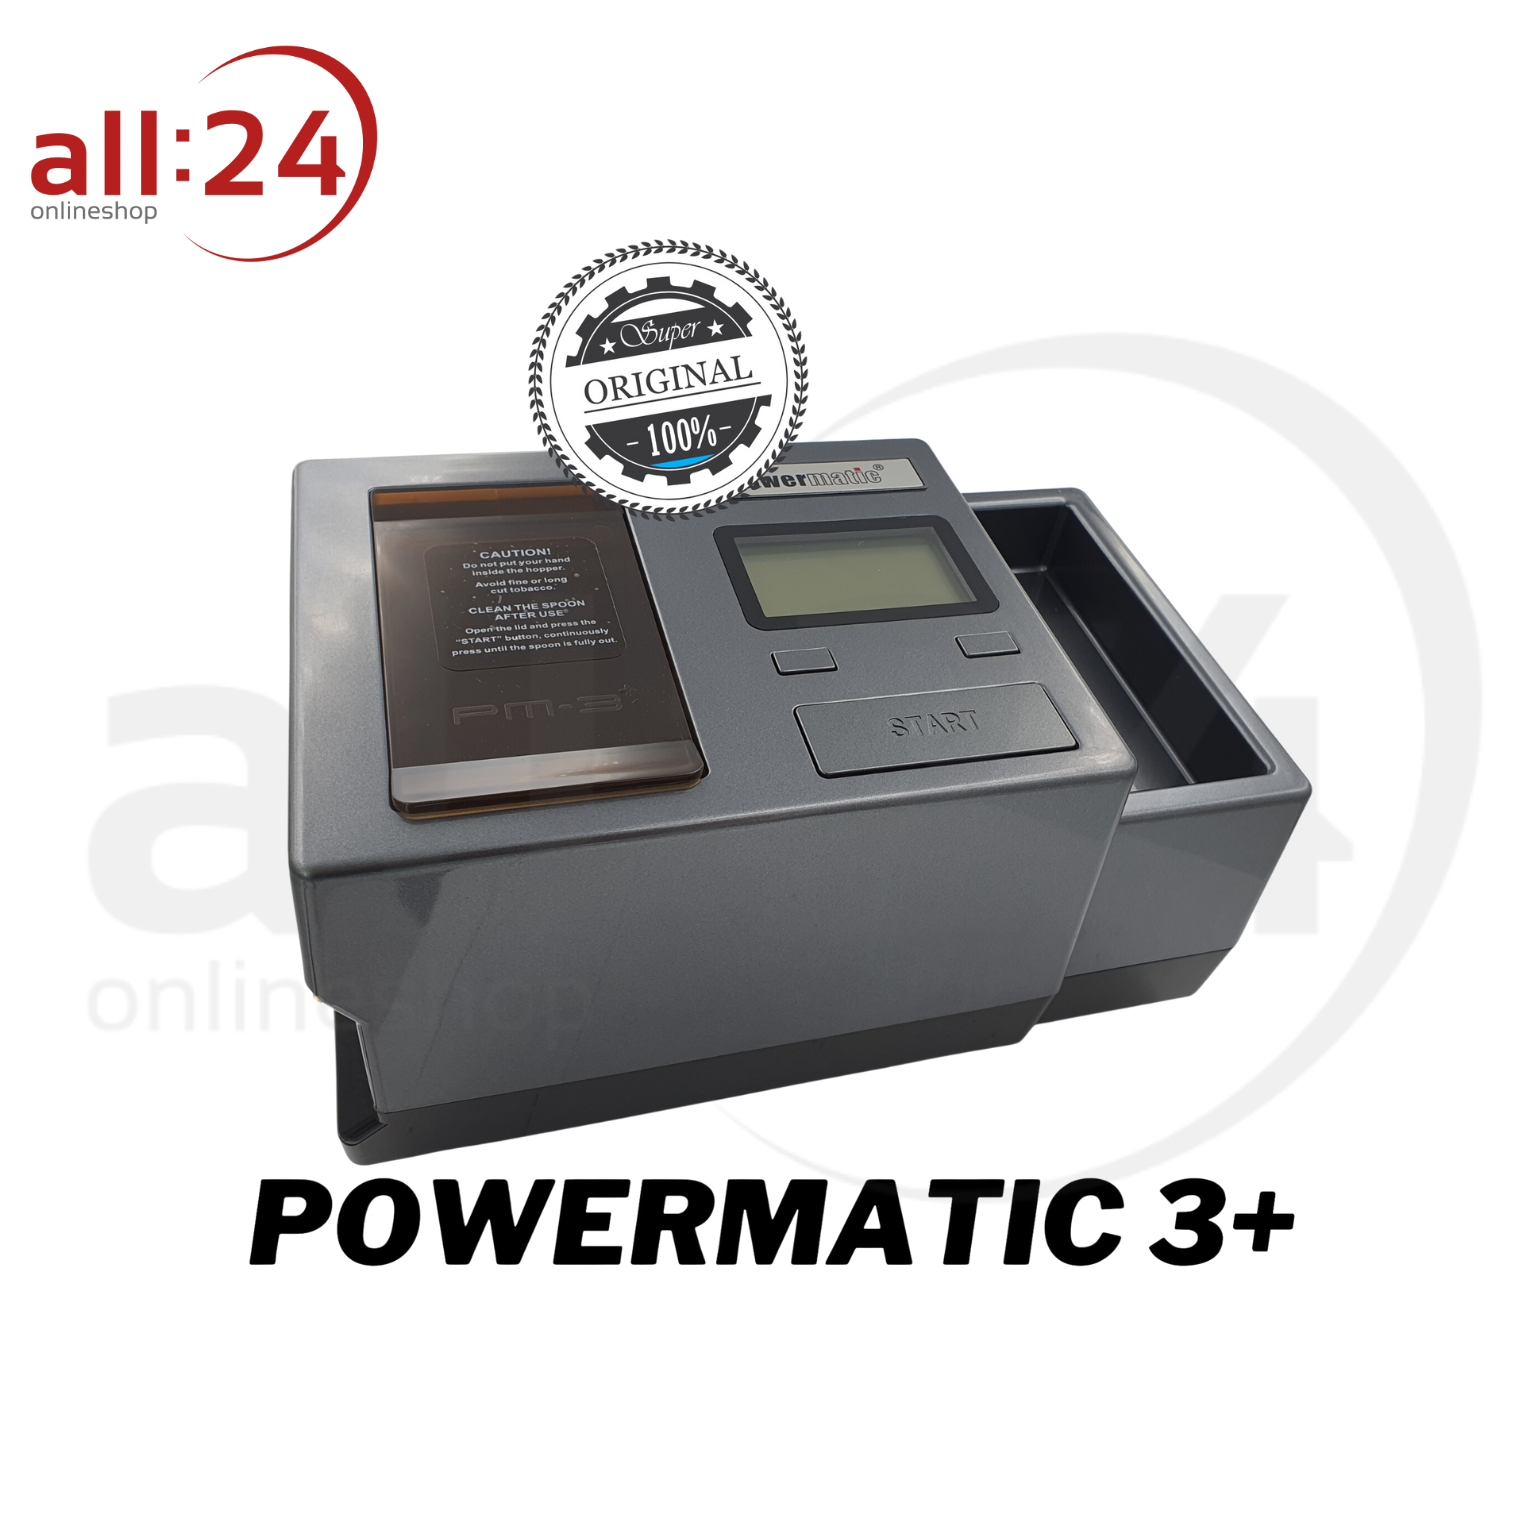 https://www.all24.at/out/pictures/master/product/1/all24_powermatic3_schwarz_plus.png